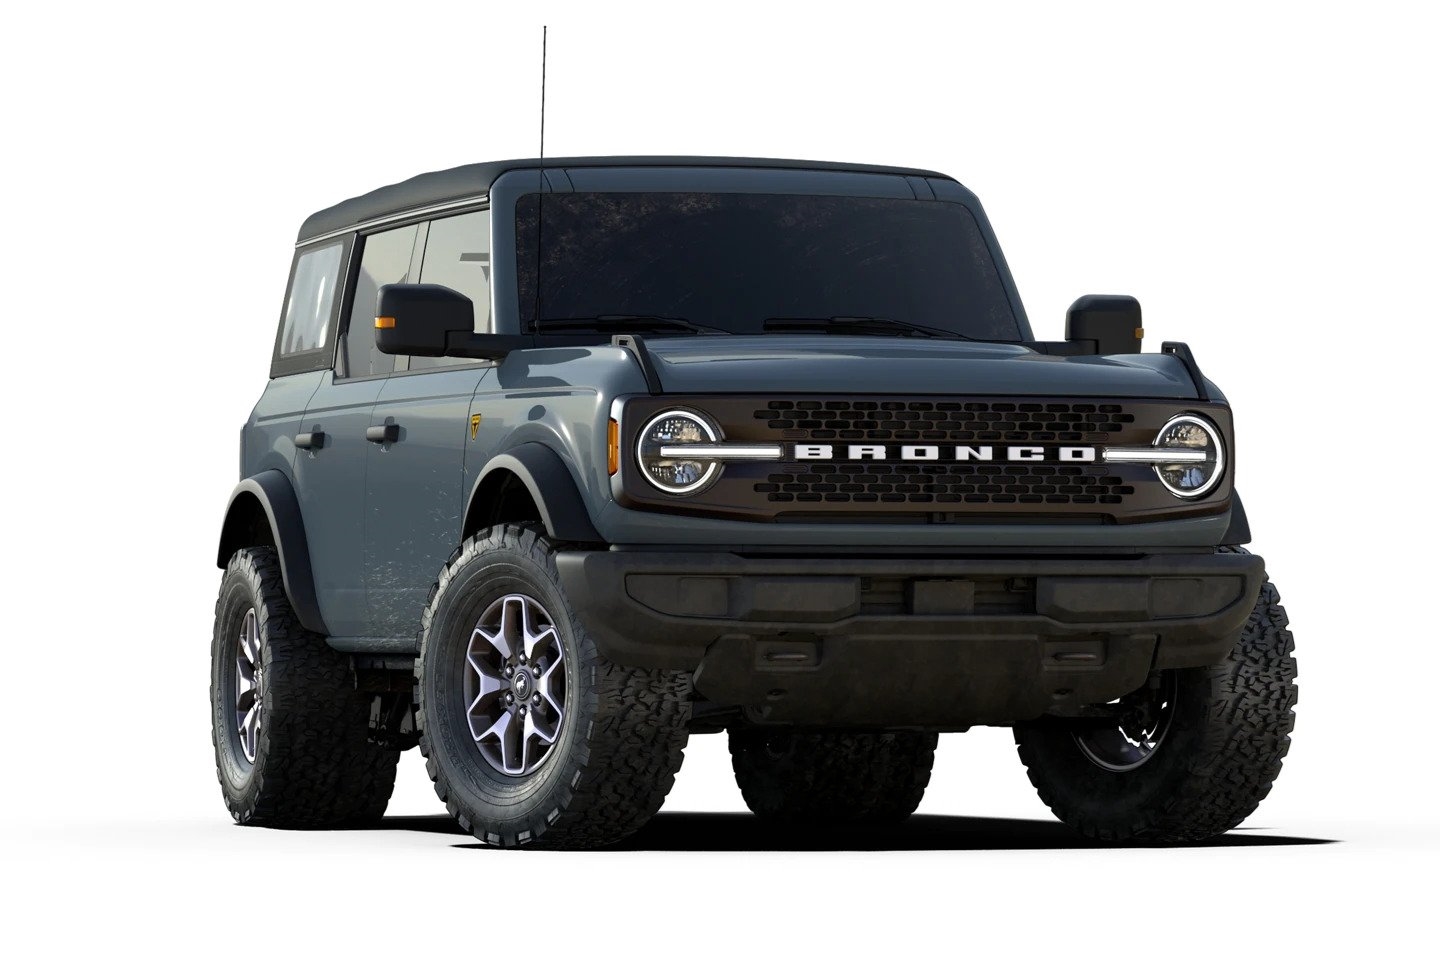 2023-ford-bronco-heritage-edition-4-door-full-specs-features-and-price